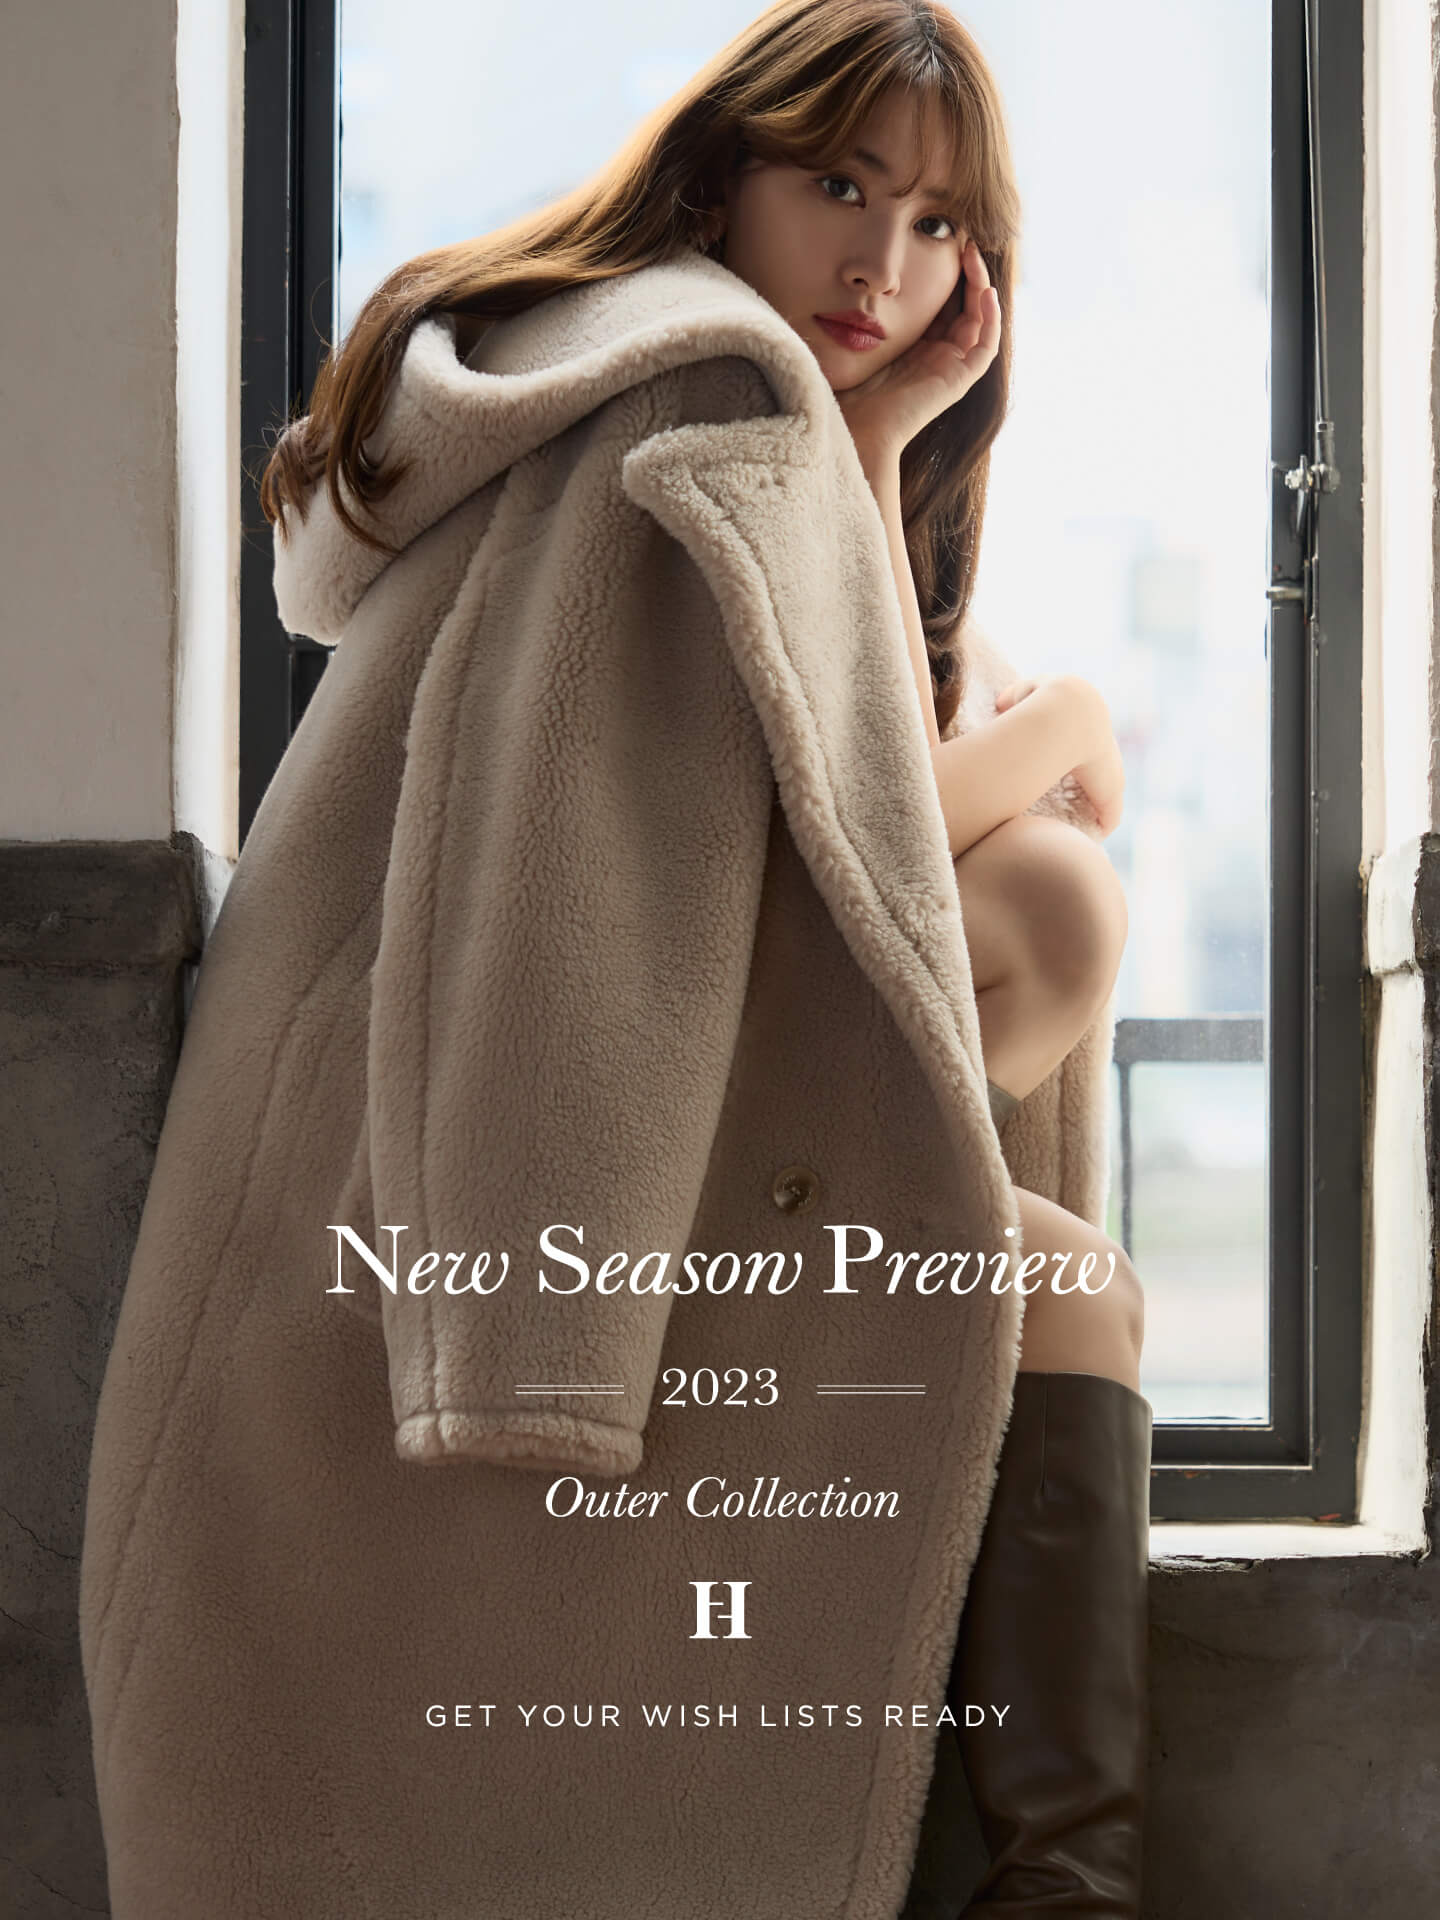 New Season Preview 2023 "Outer Collection"